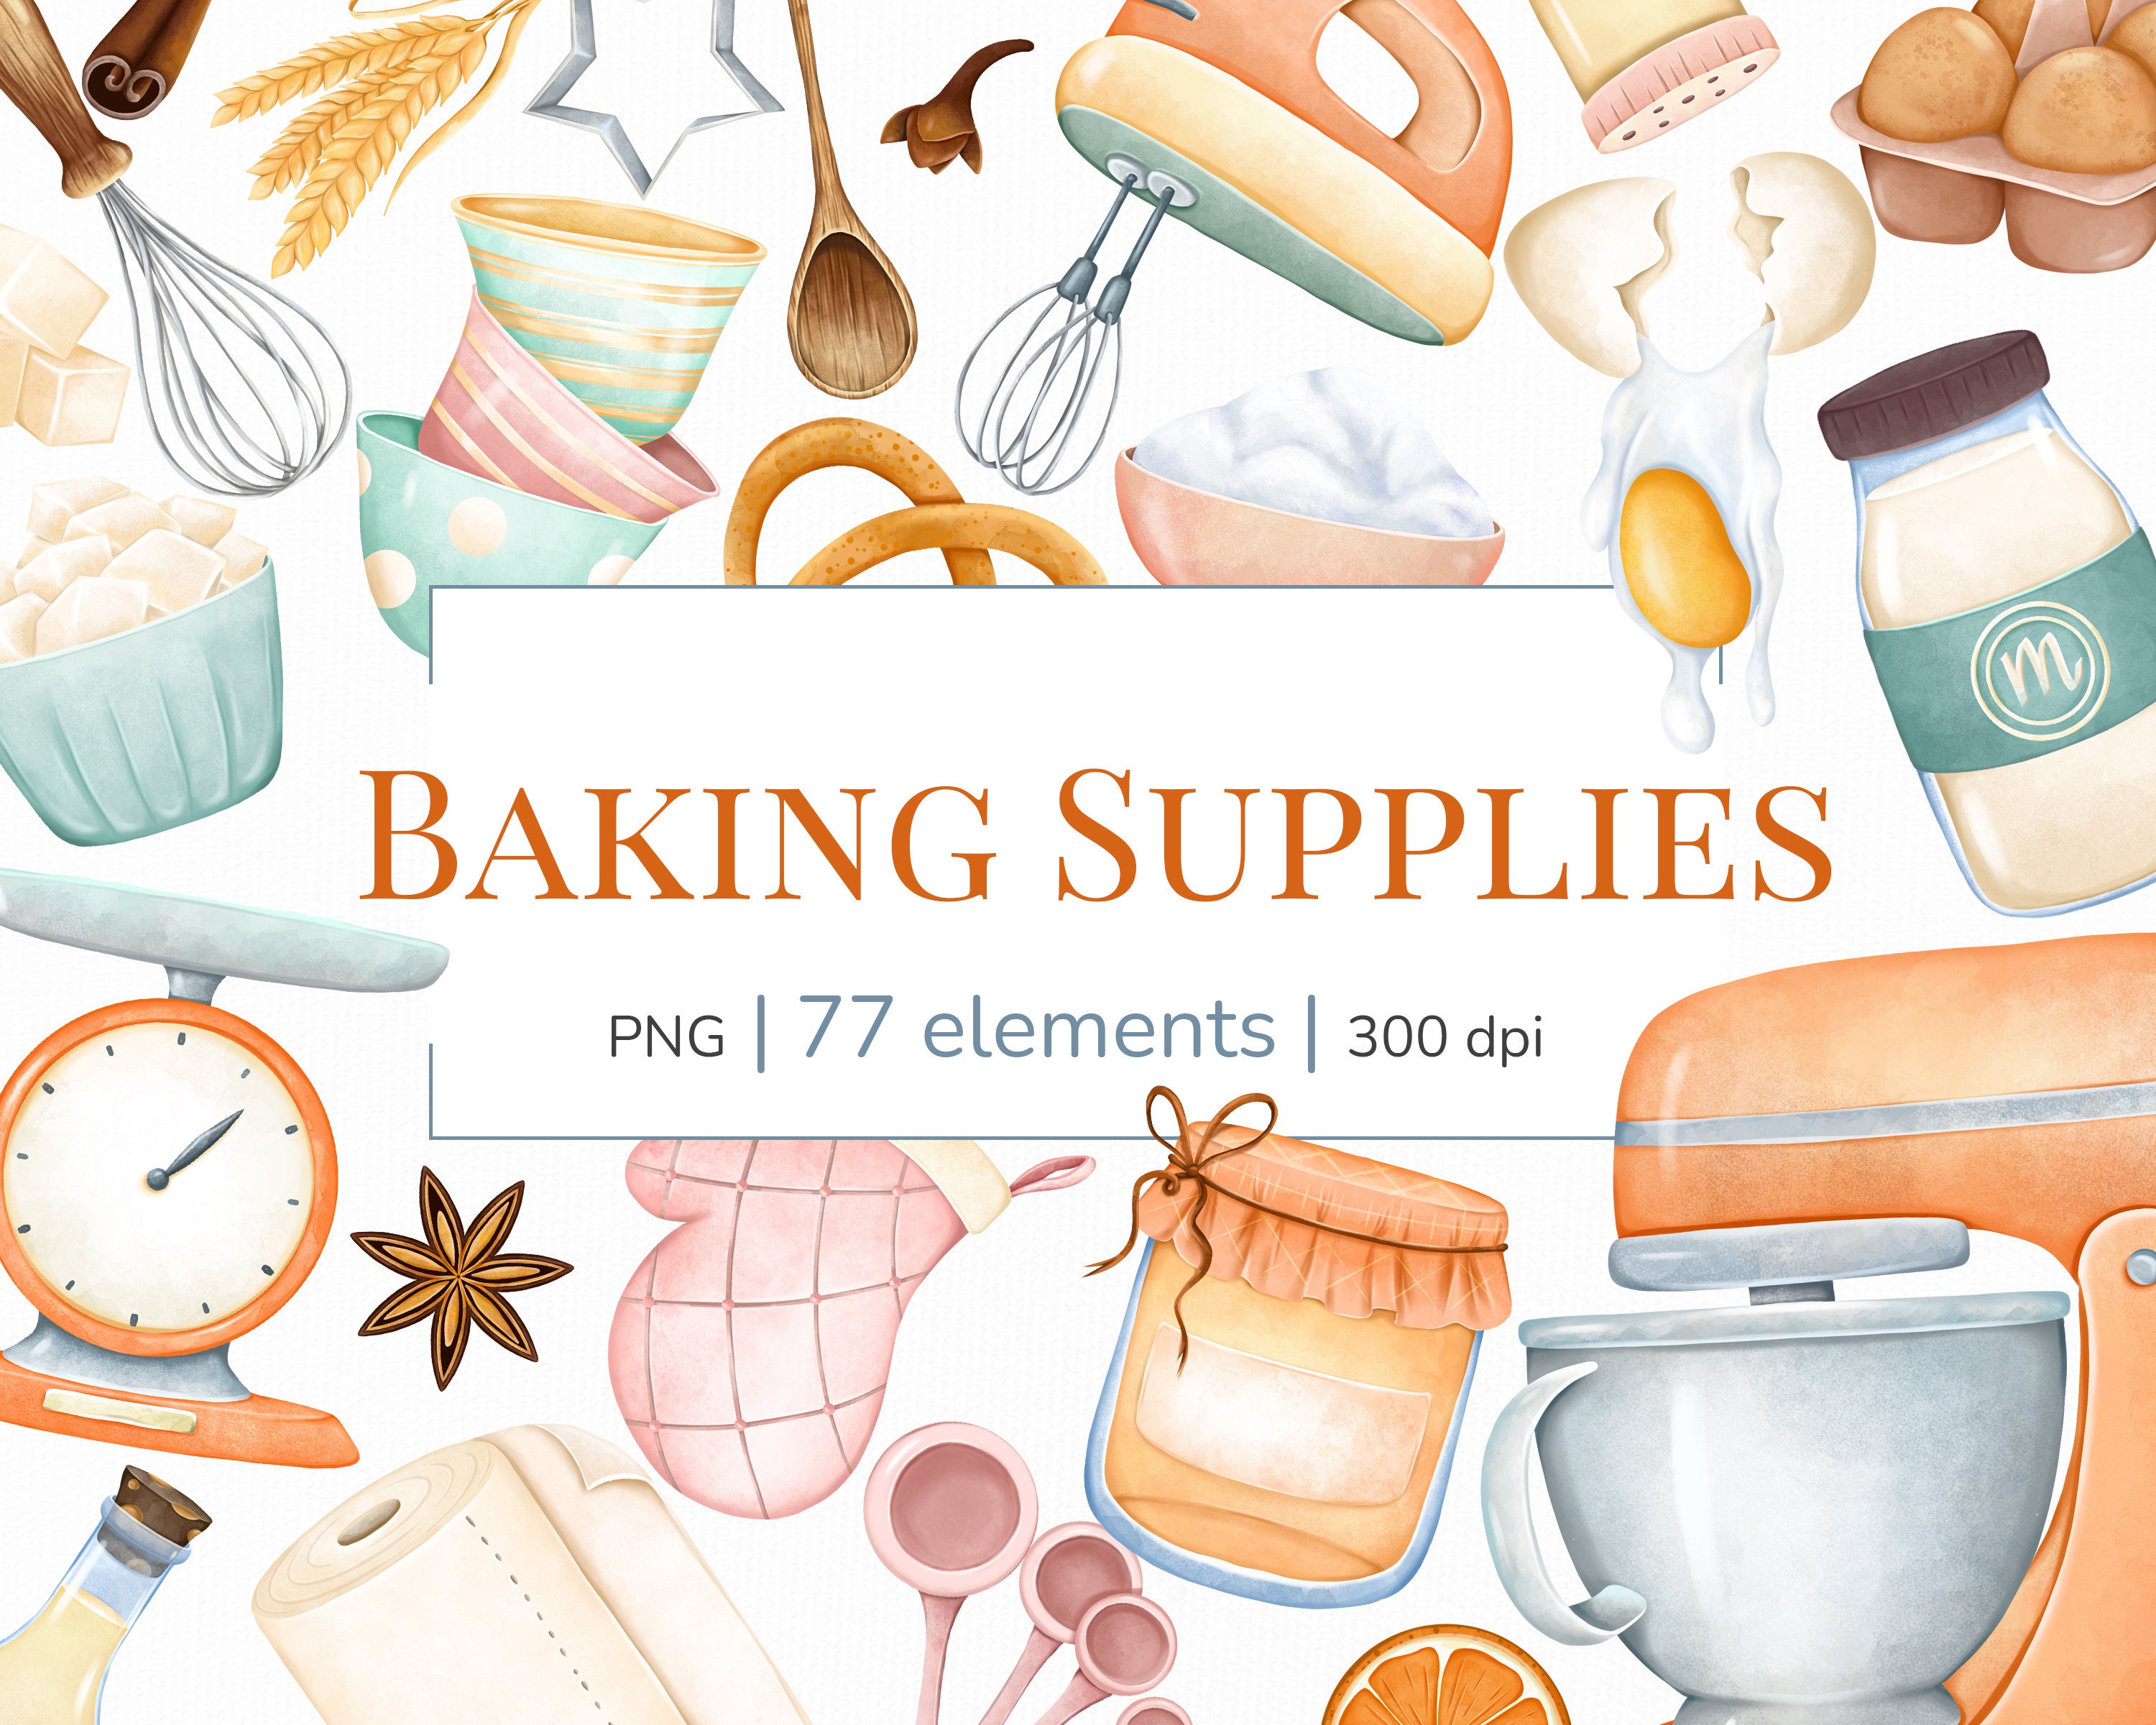 Baking Clipart, Baking Supplies, Kitchen Clipart, Food Clipart, Cake  Clipart, Bakery Logo, Baker, Kitchen Ingredients, Planner Stickers 